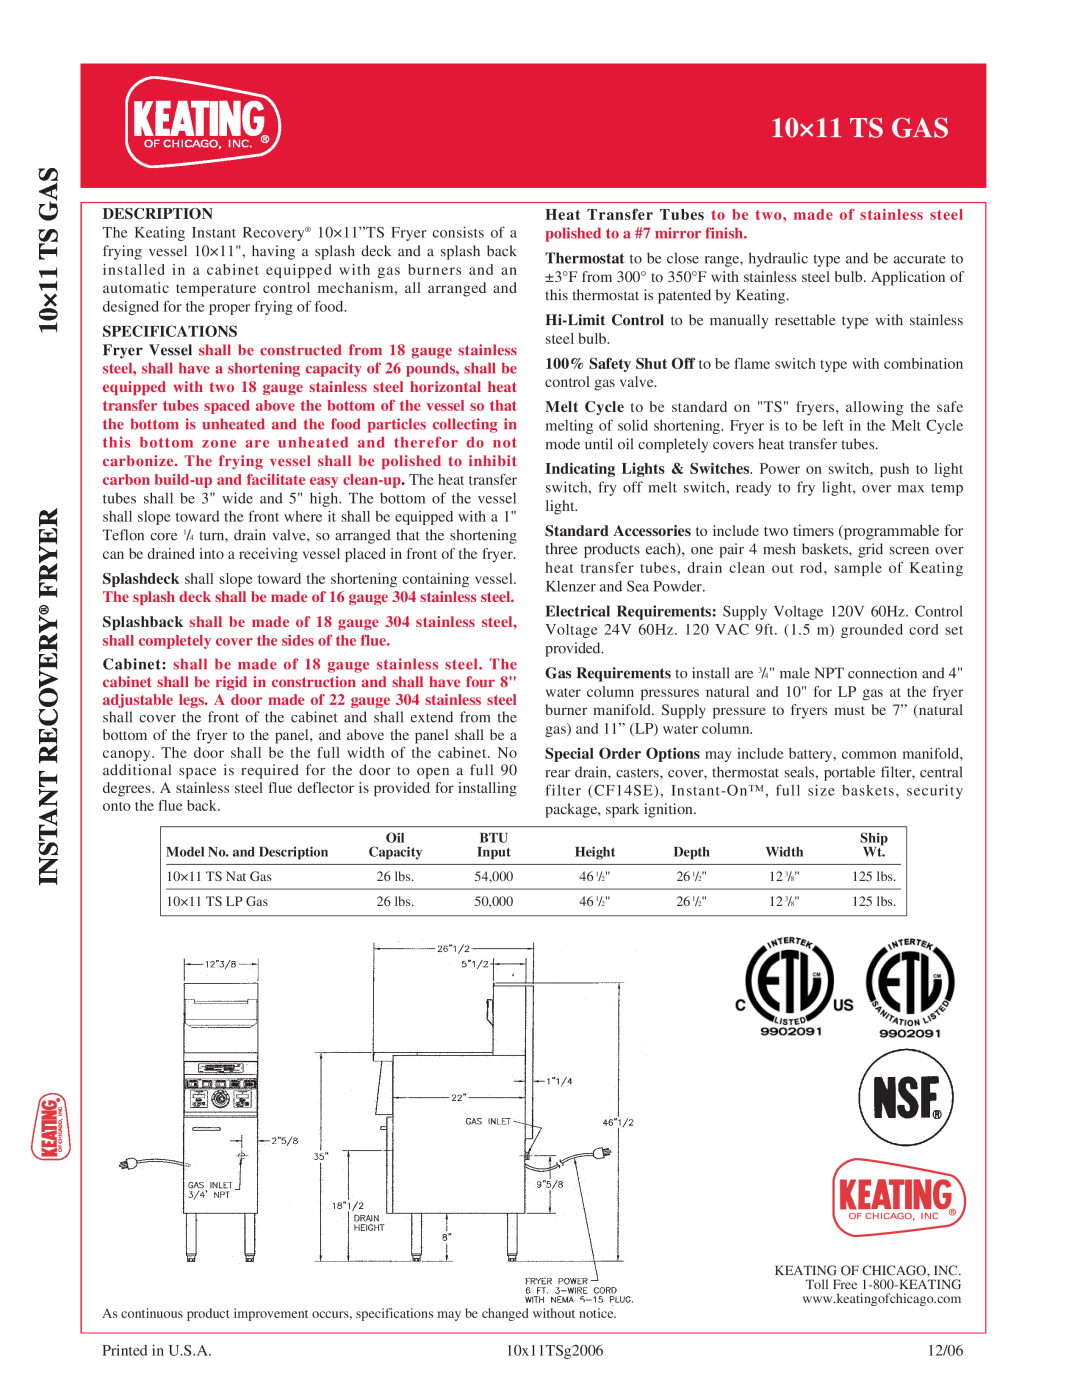 Keating Of Chicago 10x11 TS Gas manual 10×11 TS GAS RECOVERY FRYER, Description, Specifications 